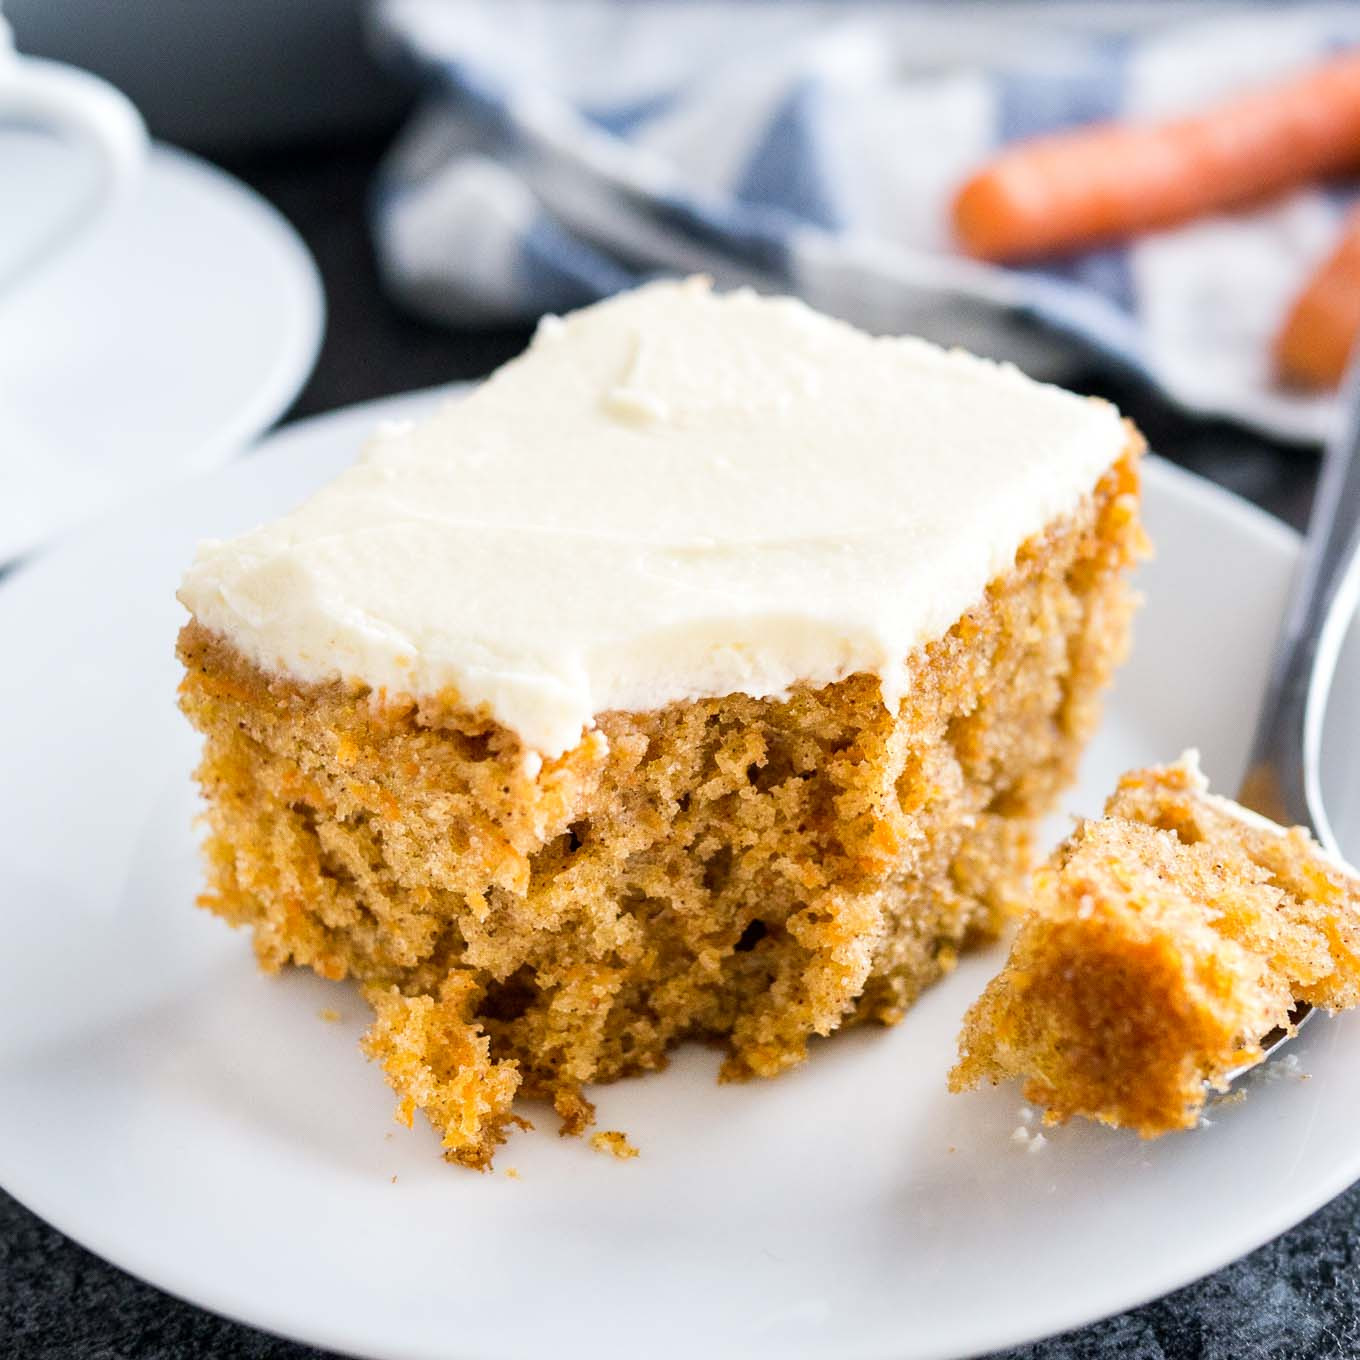 Easy Carrot Cake Recipe
 Easy Carrot Cake Recipe with Cream Cheese Frosting Nut free